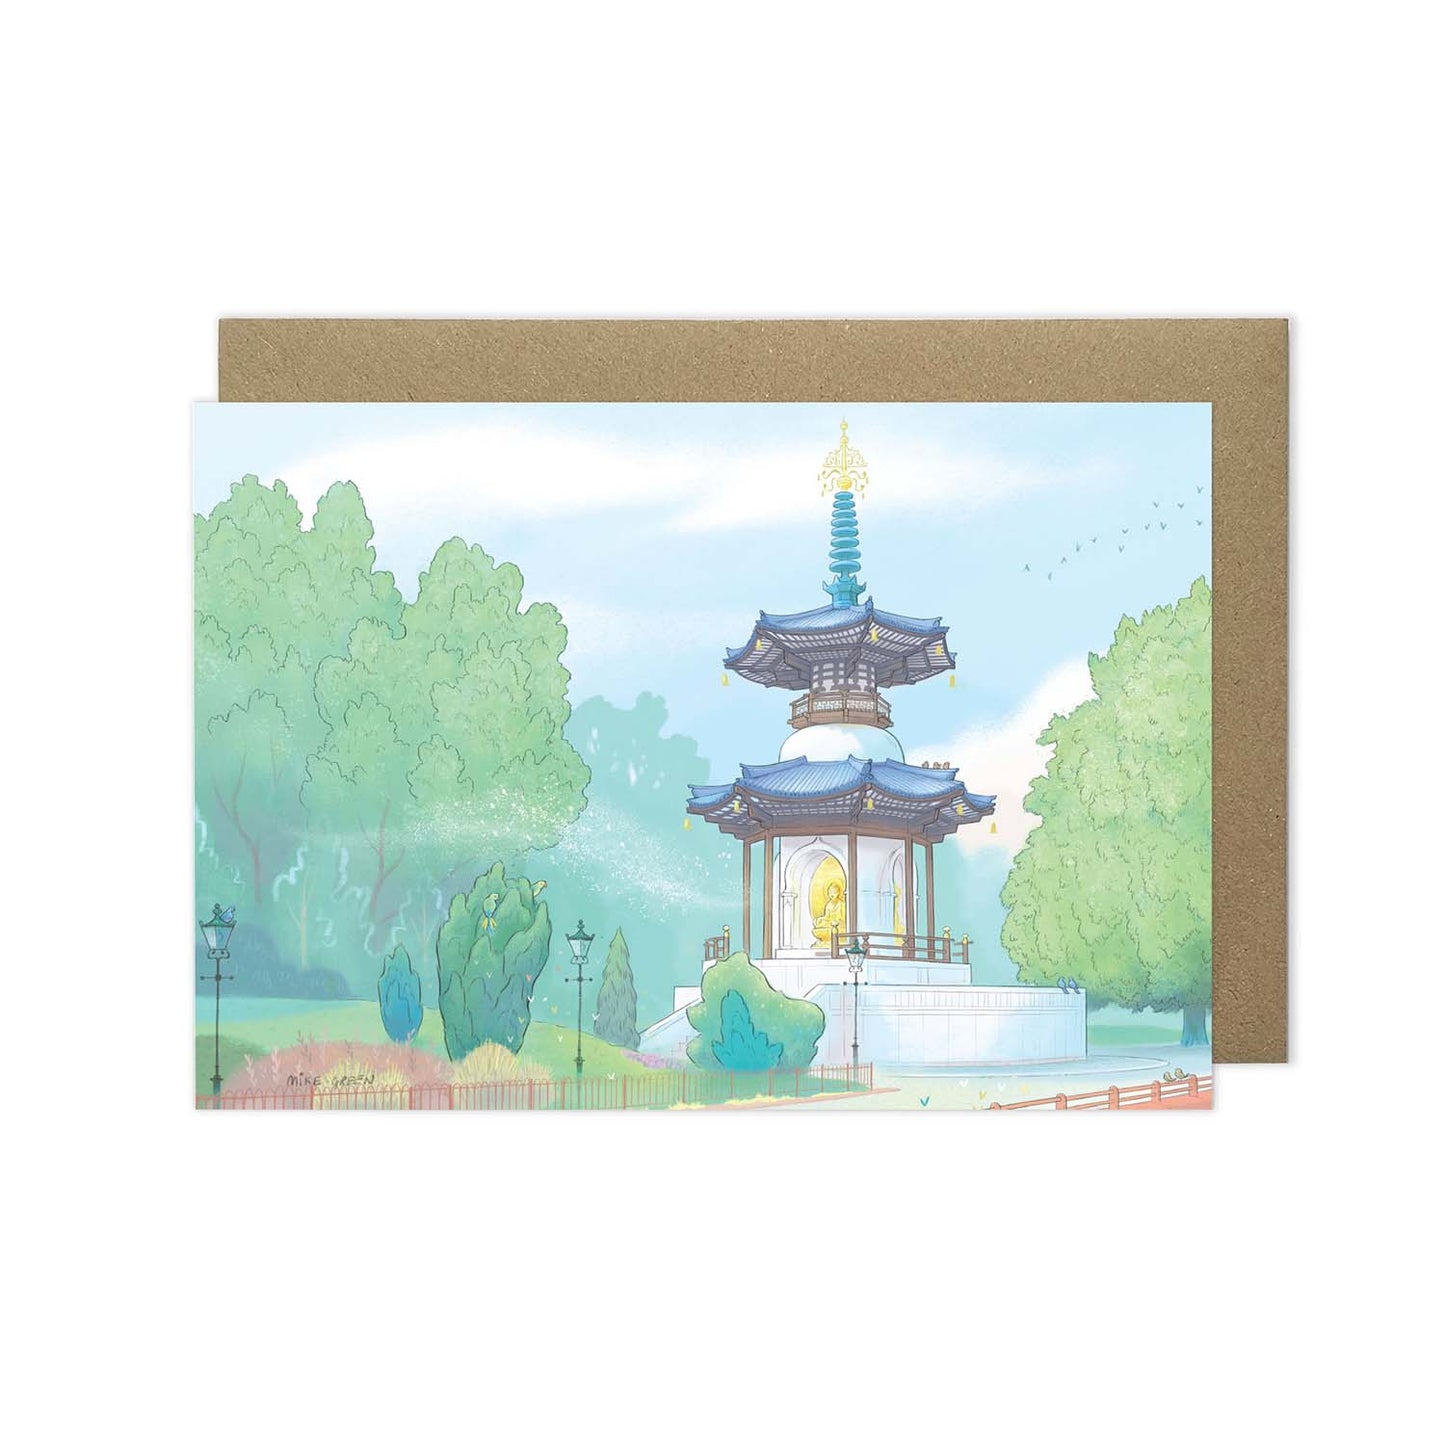 London's Battersea Park Peace Pagoda on a beautifully illustrated greeting card from mike green illustration.